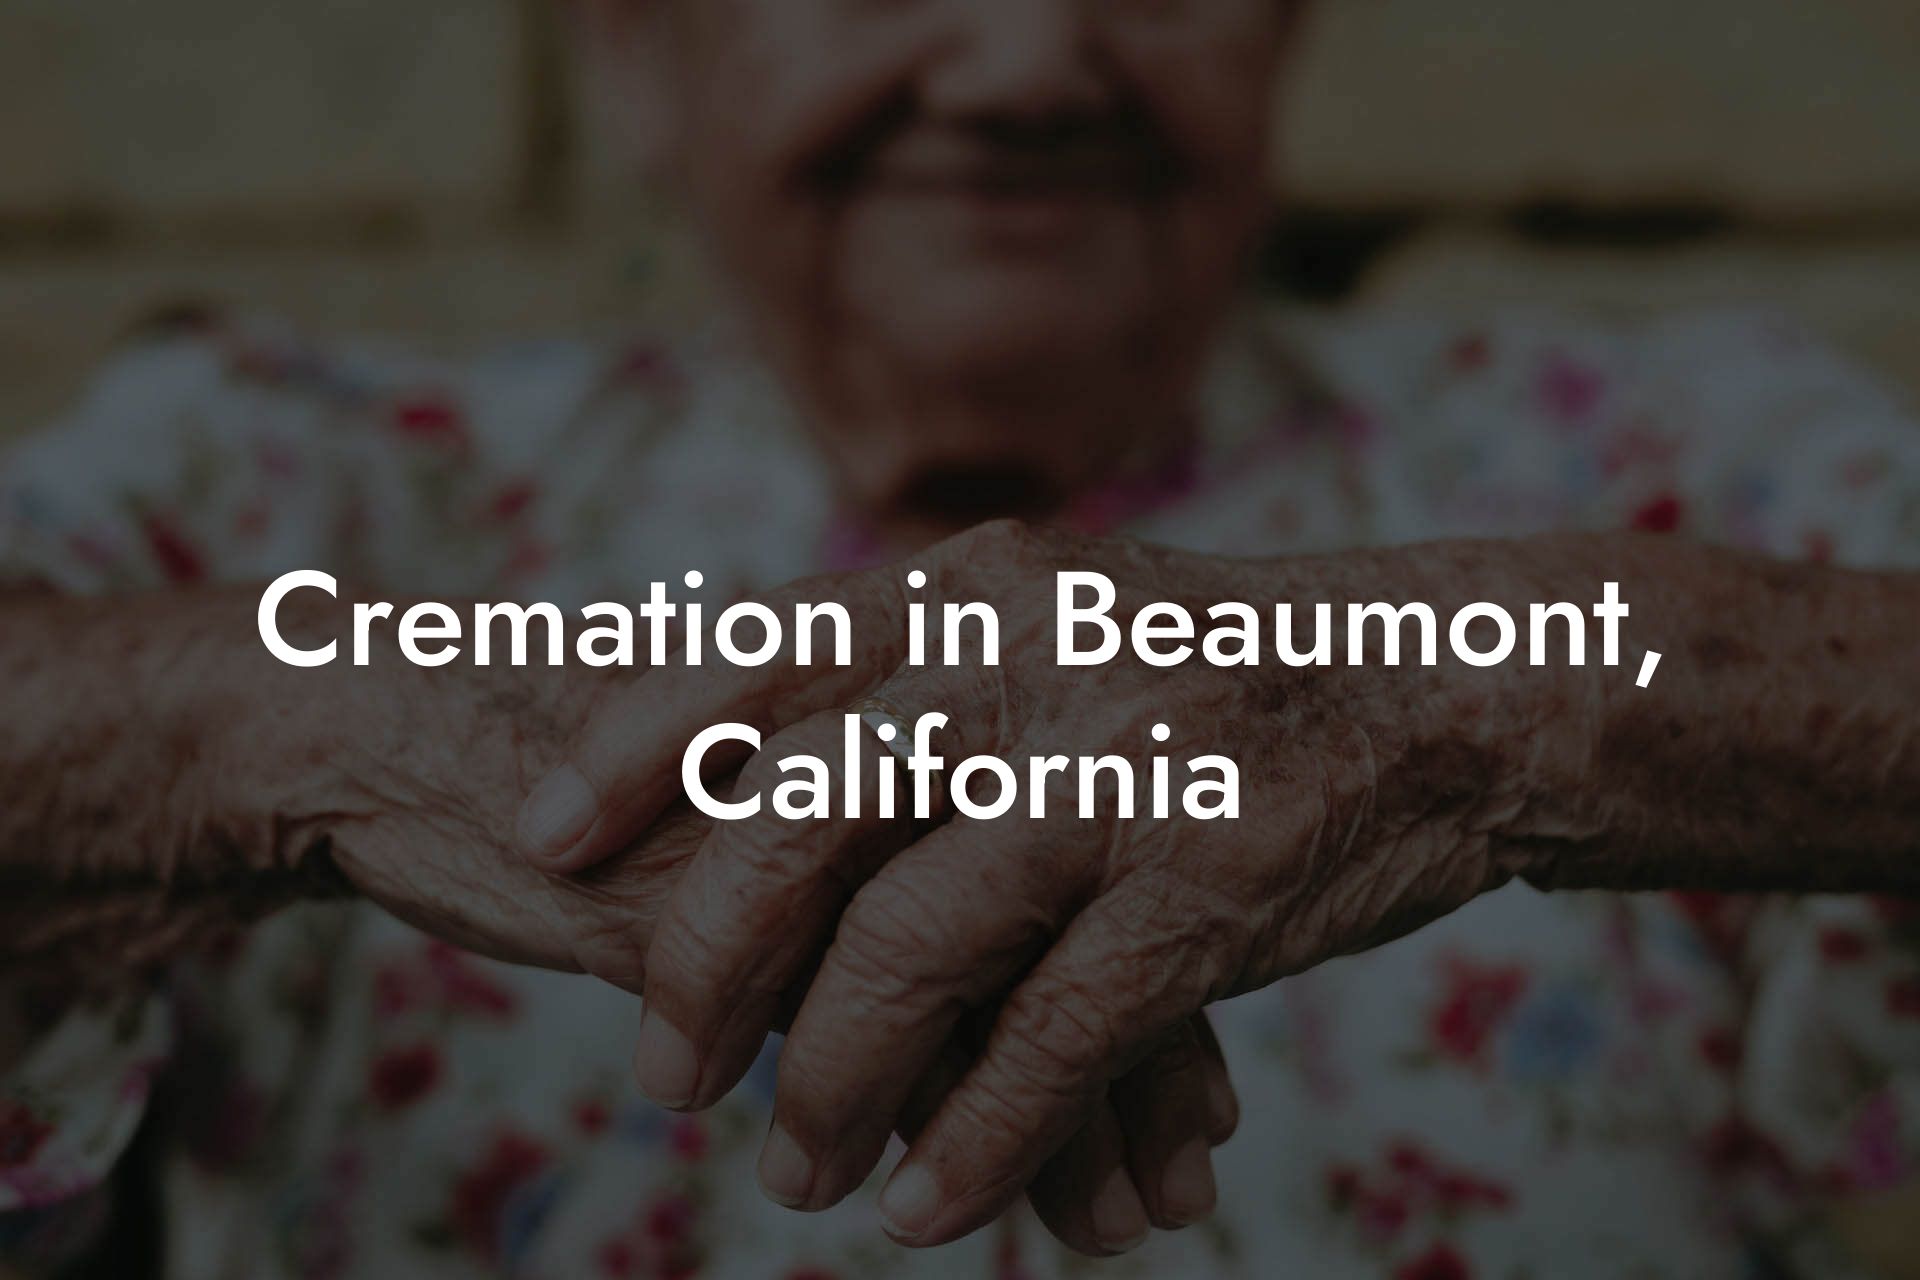 Cremation in Beaumont, California